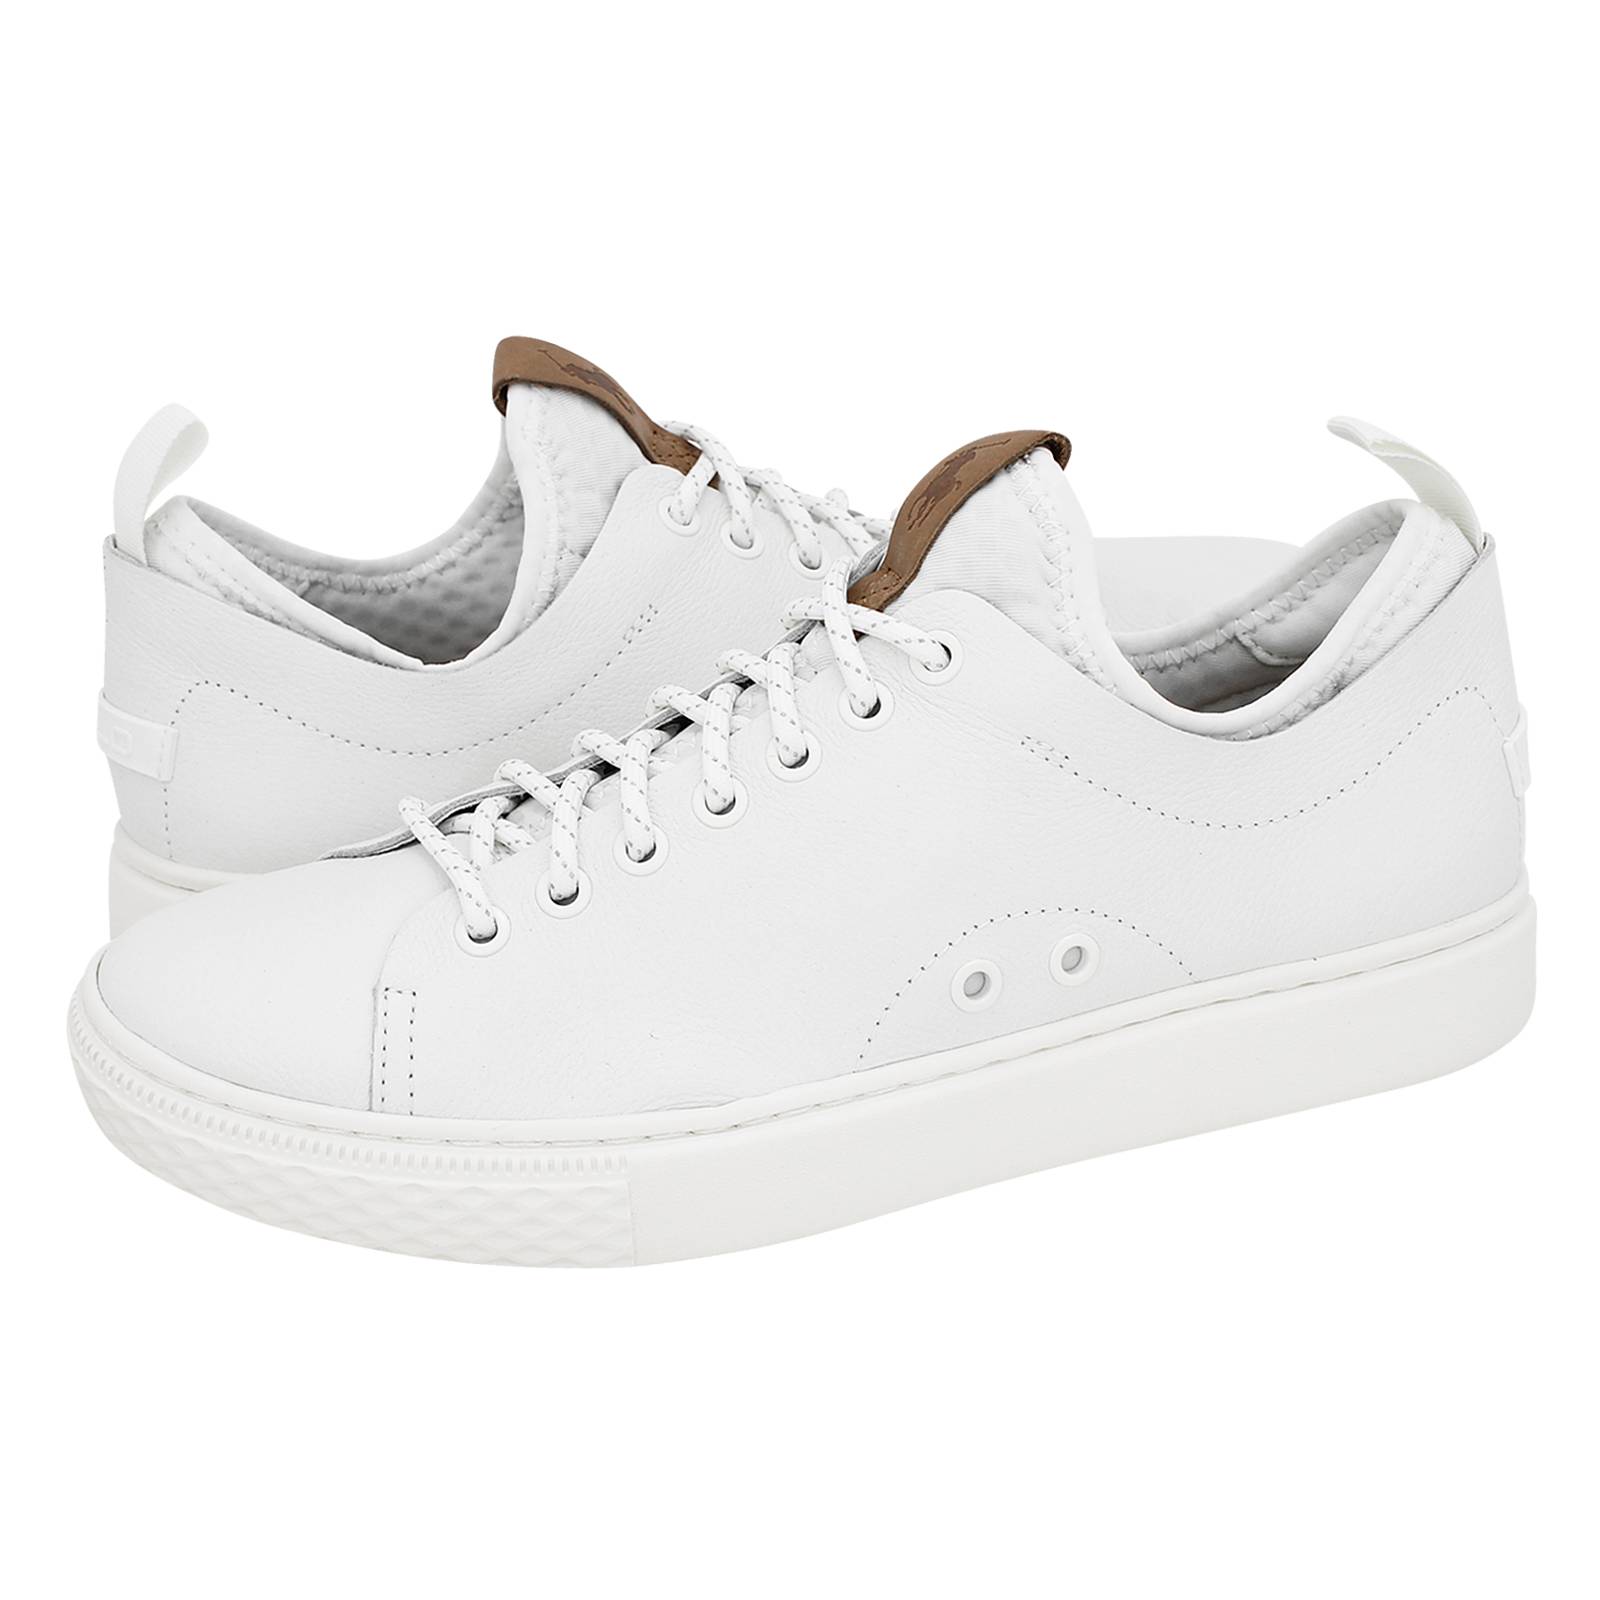 Dunovin - Polo Ralph Lauren Men's casual shoes made of leather and fabric -  Gianna Kazakou Online